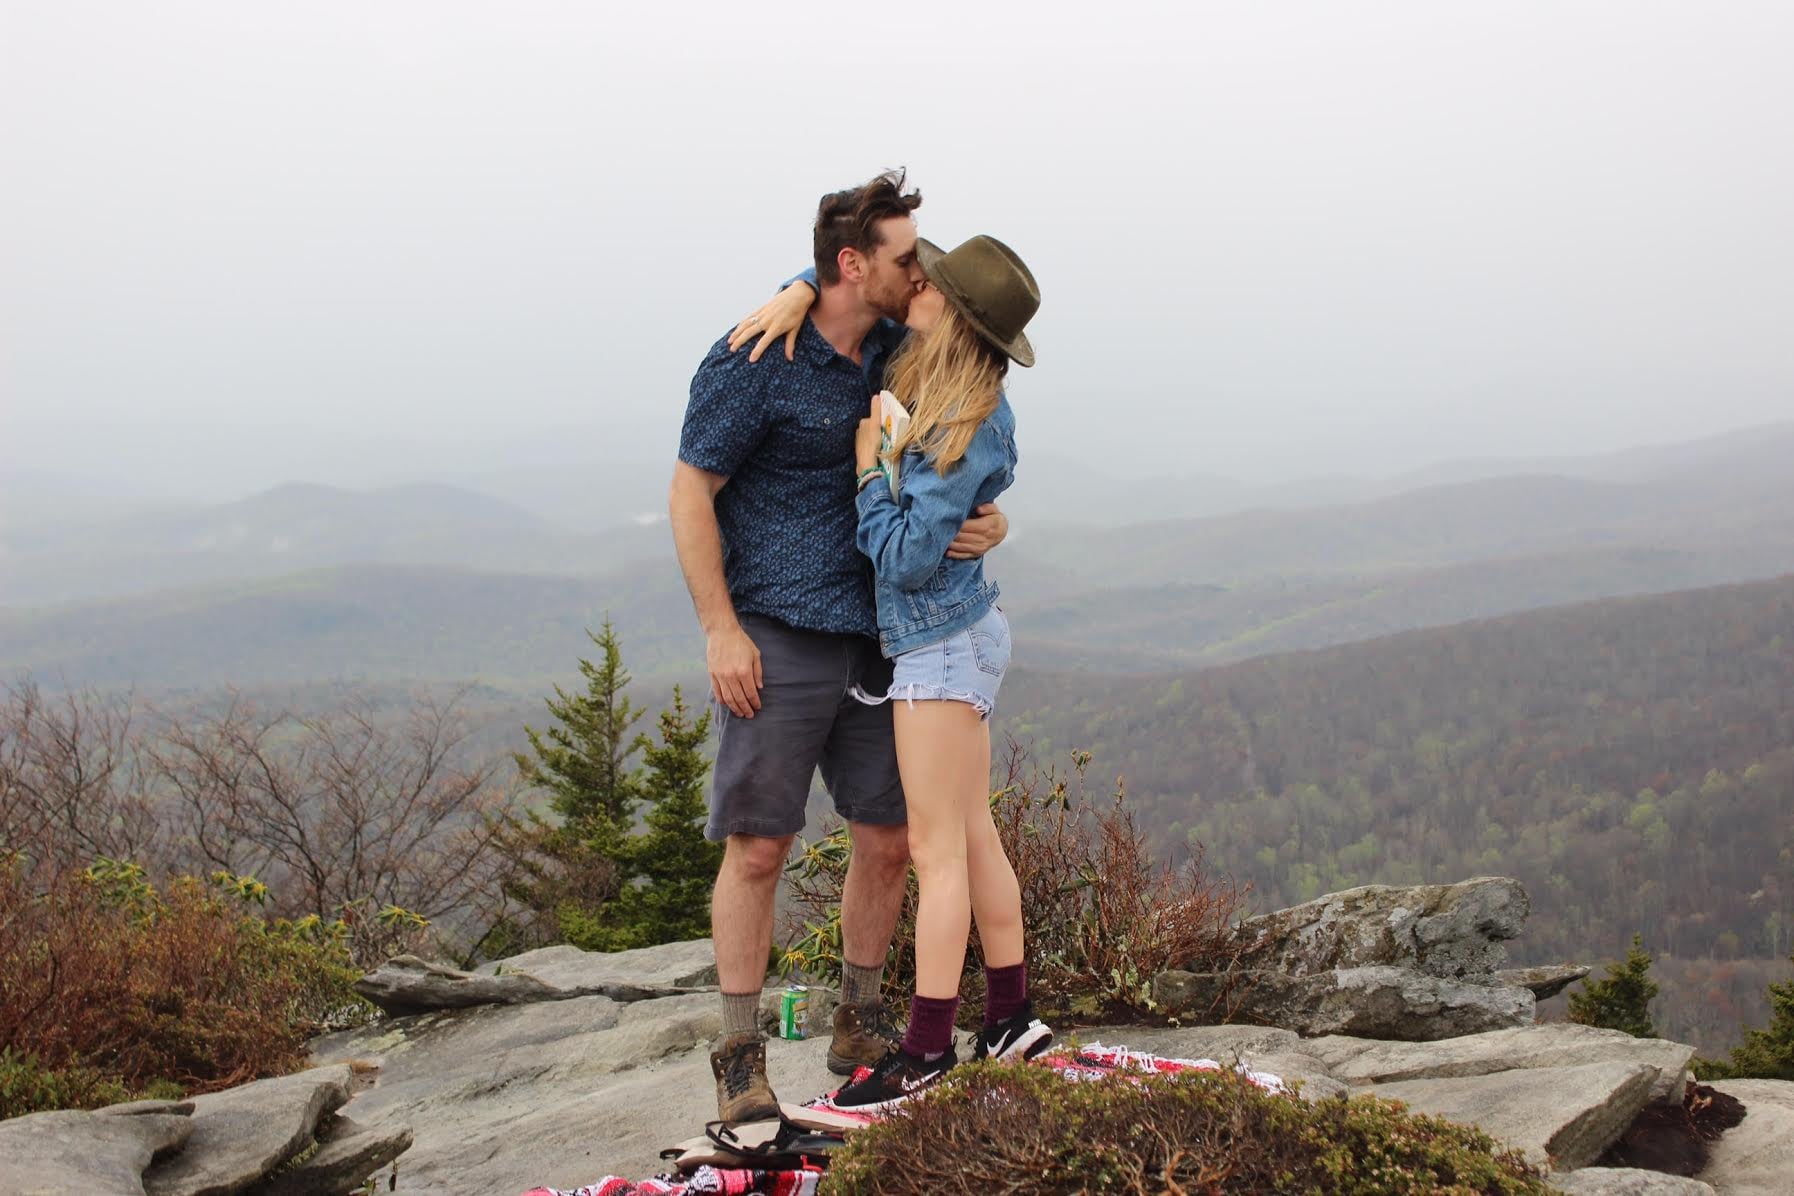 Man Proposes To His Girlfriend In His Travel Memoir Popsugar Love And Sex